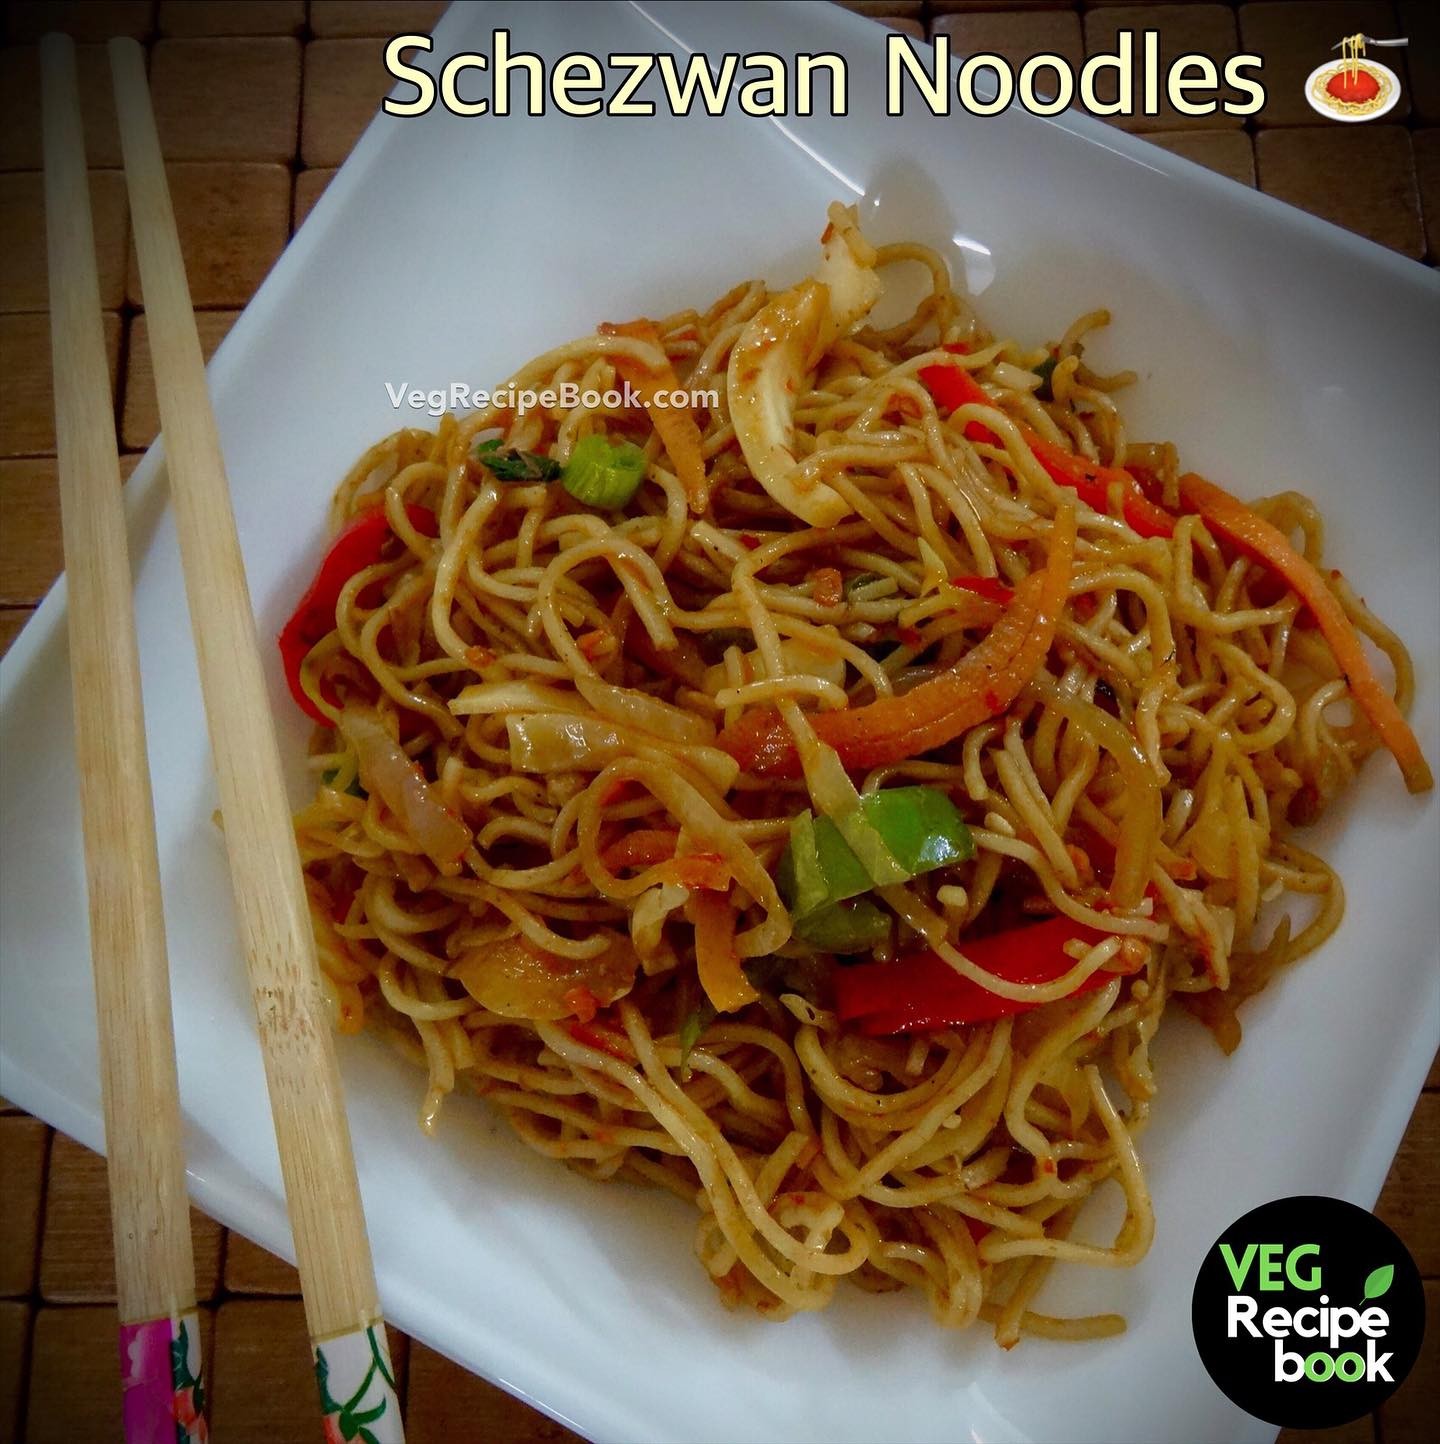 It’s all about the spice🌶
📸 Schezwan Noodles 🍜 
.
.
.
Follow me @thevegrecipebook for more amazing Recipes.
.
.
#schezwannoodles #noodles #noodle #spicynoodles #noodles🍜 #chinesefood #chinesefoodlover #vegrecipebook #itsmegrd #garuskitchen #vegnoodles #vegannoodles #veganfood #veganrecipes #vegansofig #foodiefeature #foodieofdelhi #cookingistherapy #noodlelove #foodphotographer #learningathome #foodisfuel #japanesefood #chinesefoodlover #homemadefoodisthebest #foodgram #foodnetwork #foodforfoodies #veganfoodshare #foodporn #foodblogoftheday